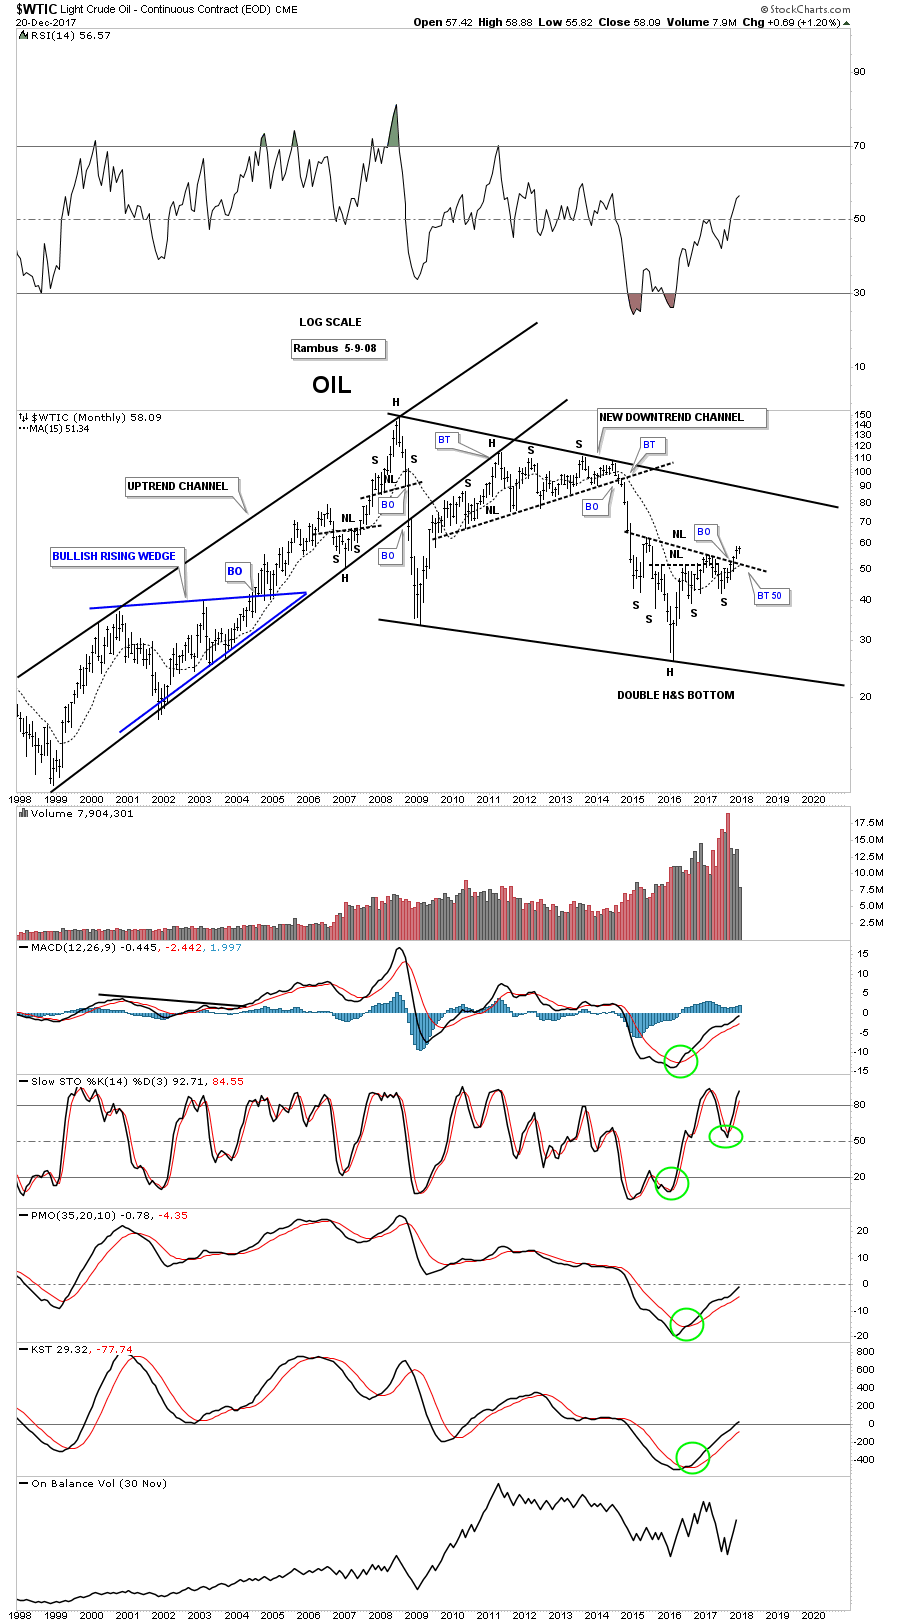 WTIC Monthly 1998-2017